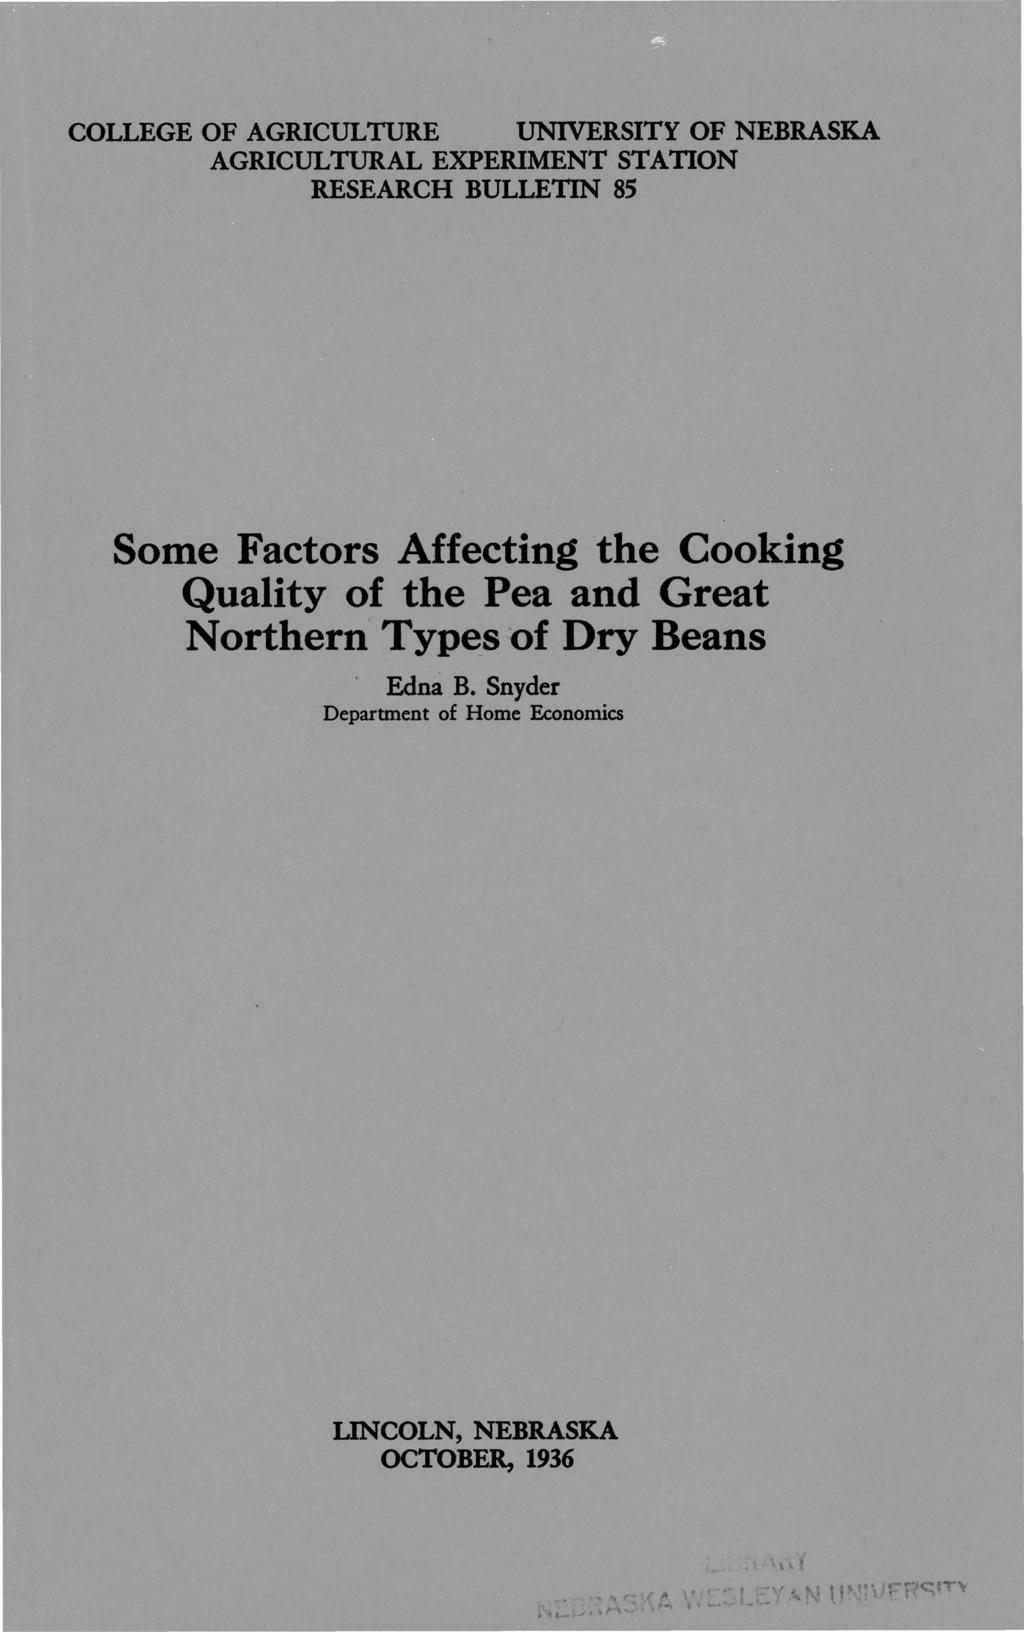 COLLEGE OF AGRICULTURE UNIVERSITY OF NEBRASKA AGRICULTURAL EXPERIMENT STATION RESEARCH BULLETIN 85 Some Factors Affecting the Cooking Quality of the Pea and